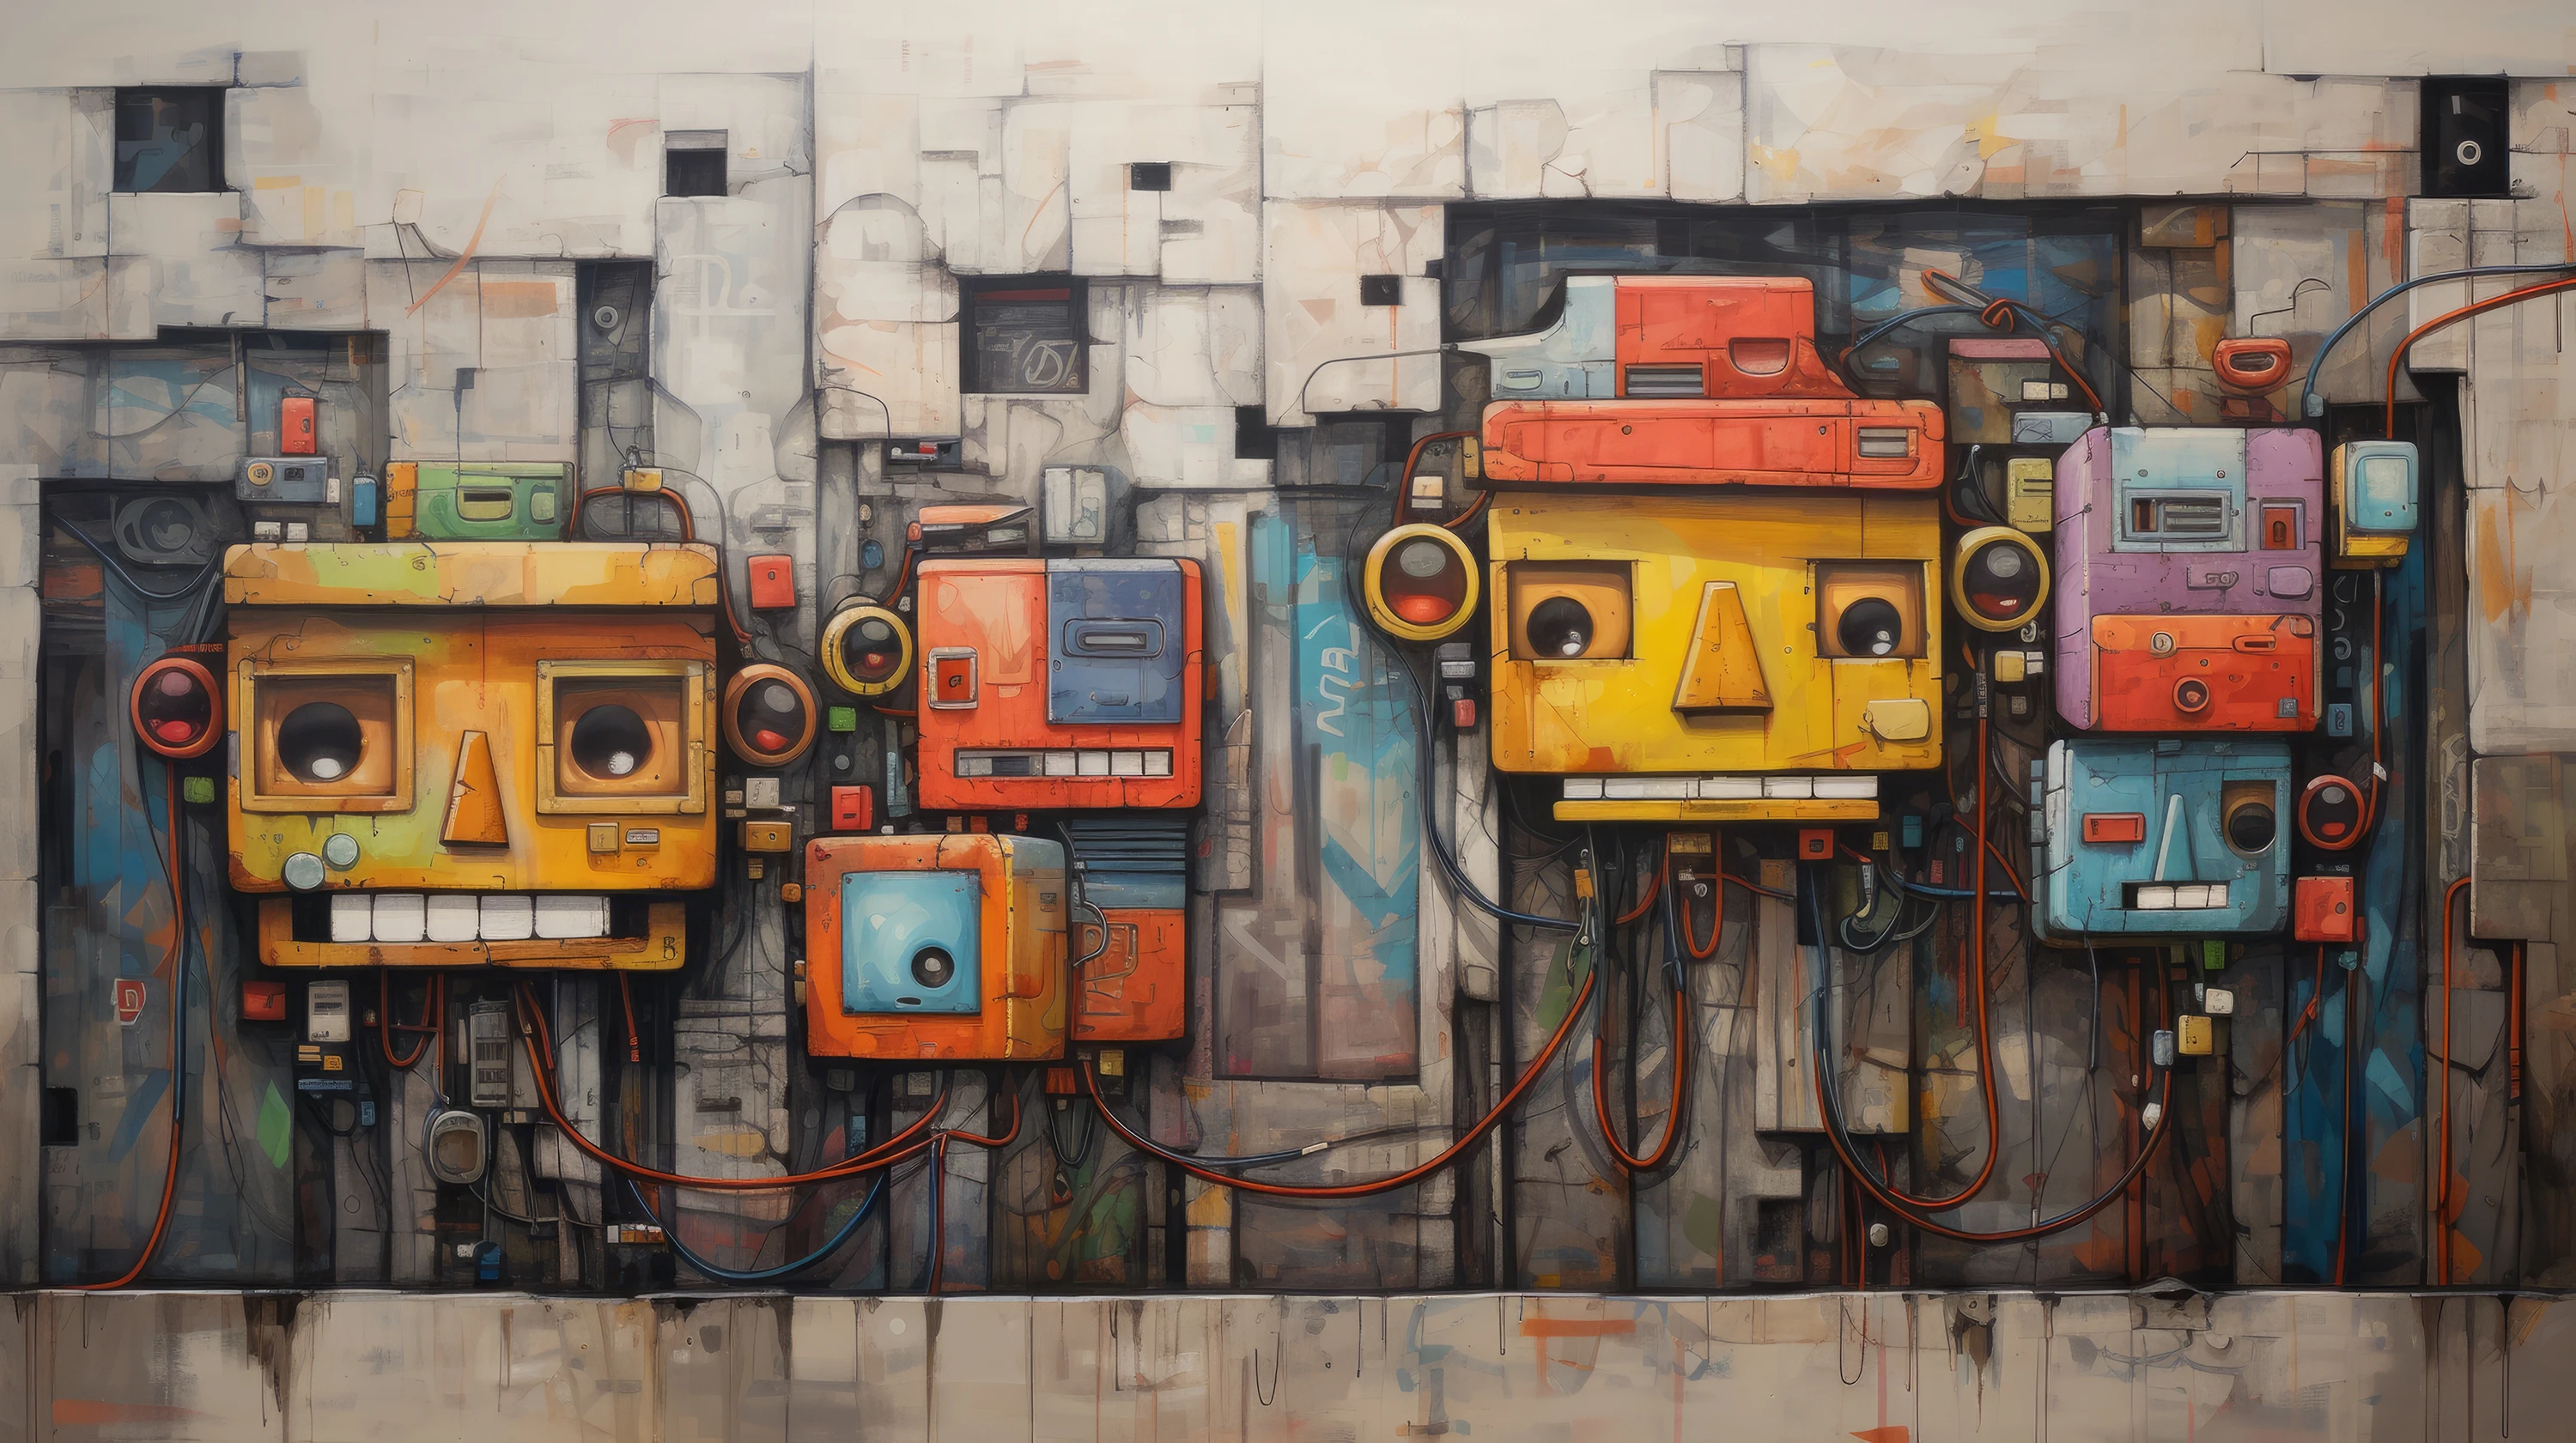 A surreal composition showing colorful mechanical boxes against a concrete wall.